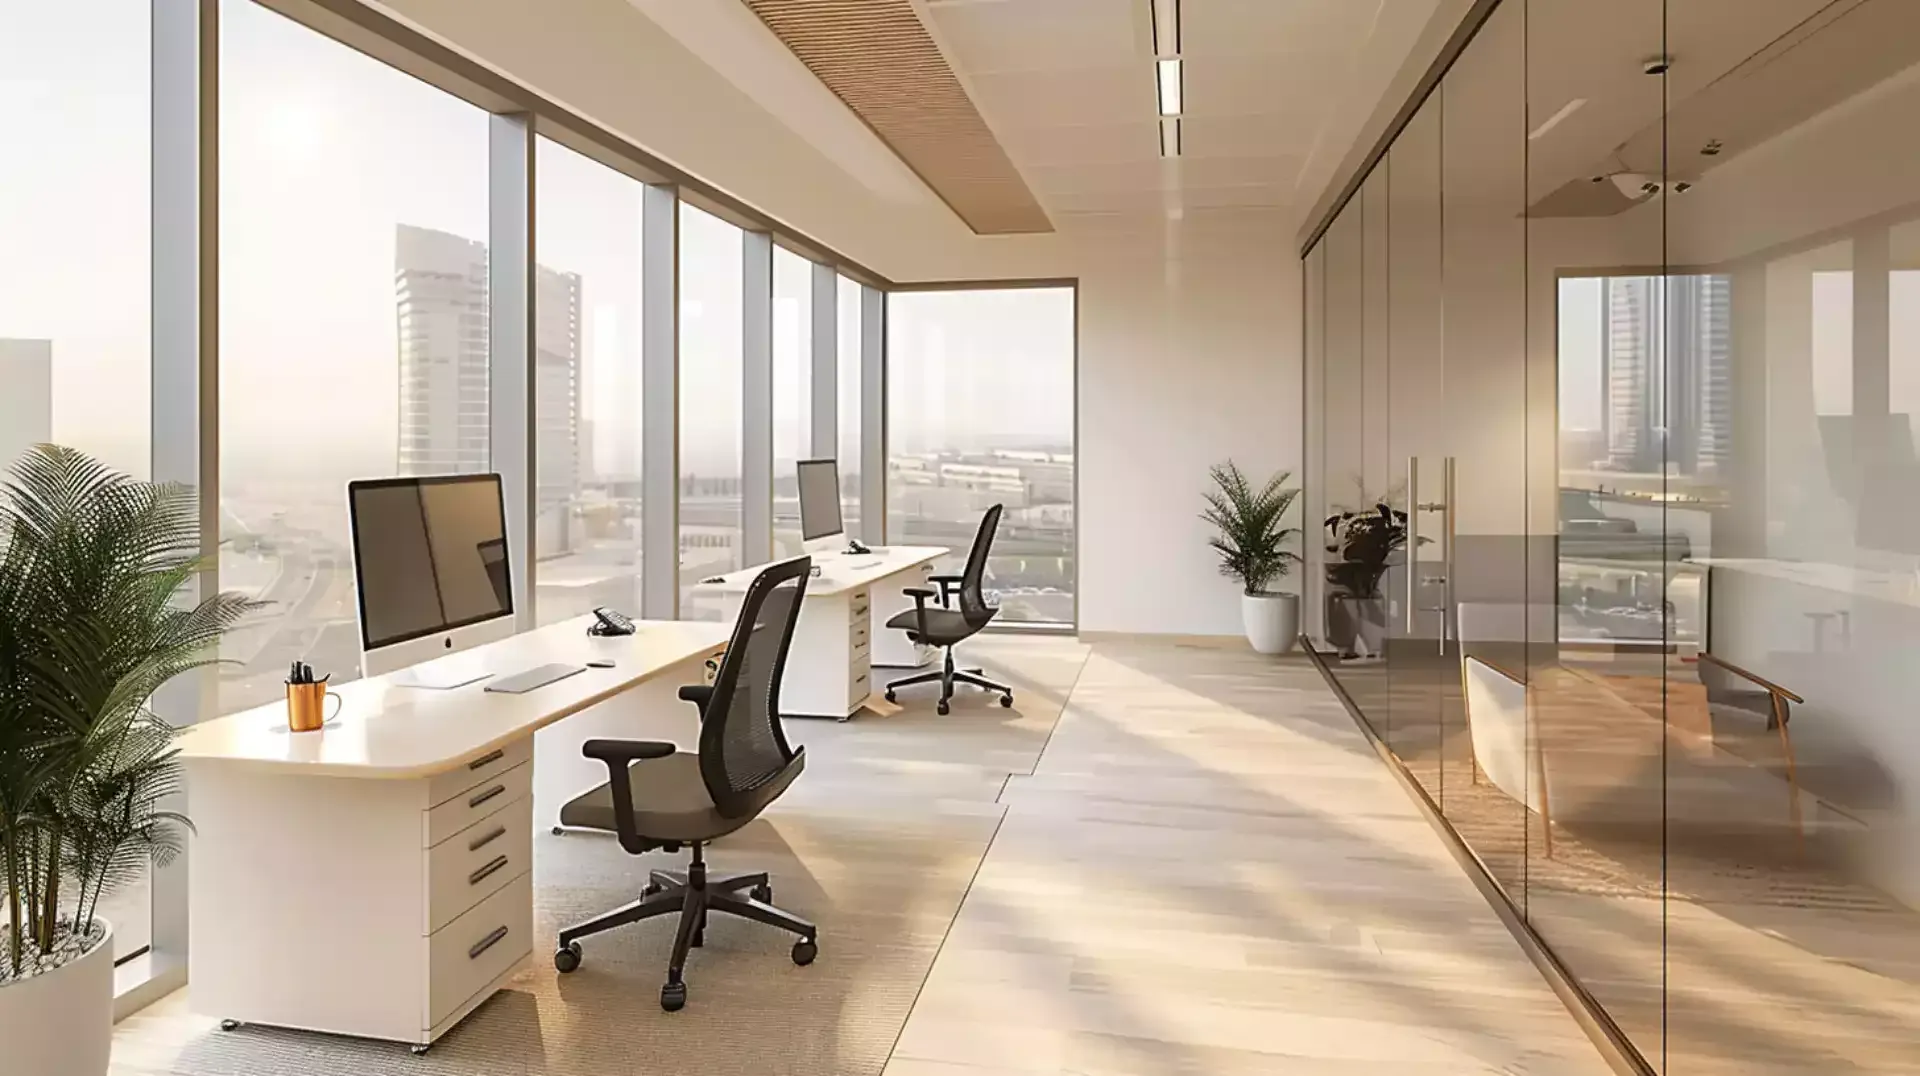 Prime Office Space for Rent in Dubai's Business Hub